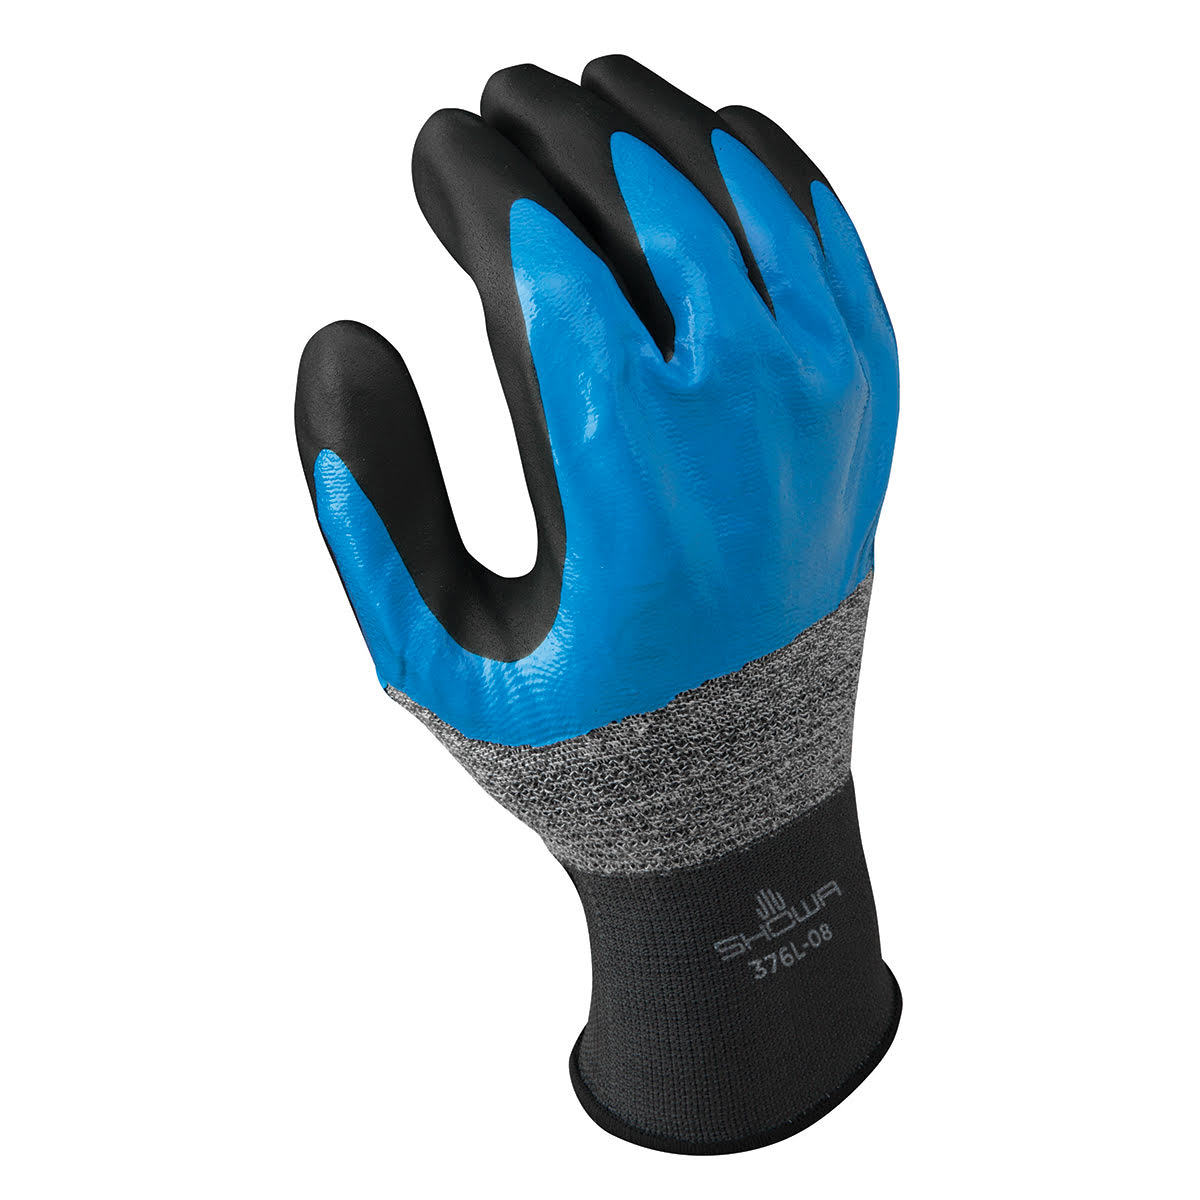 SHOWA® Size 10 13 Gauge Foam Nitrile Full Hand Coated Work Gloves With Seamless Knit Liner And Knit Wrist